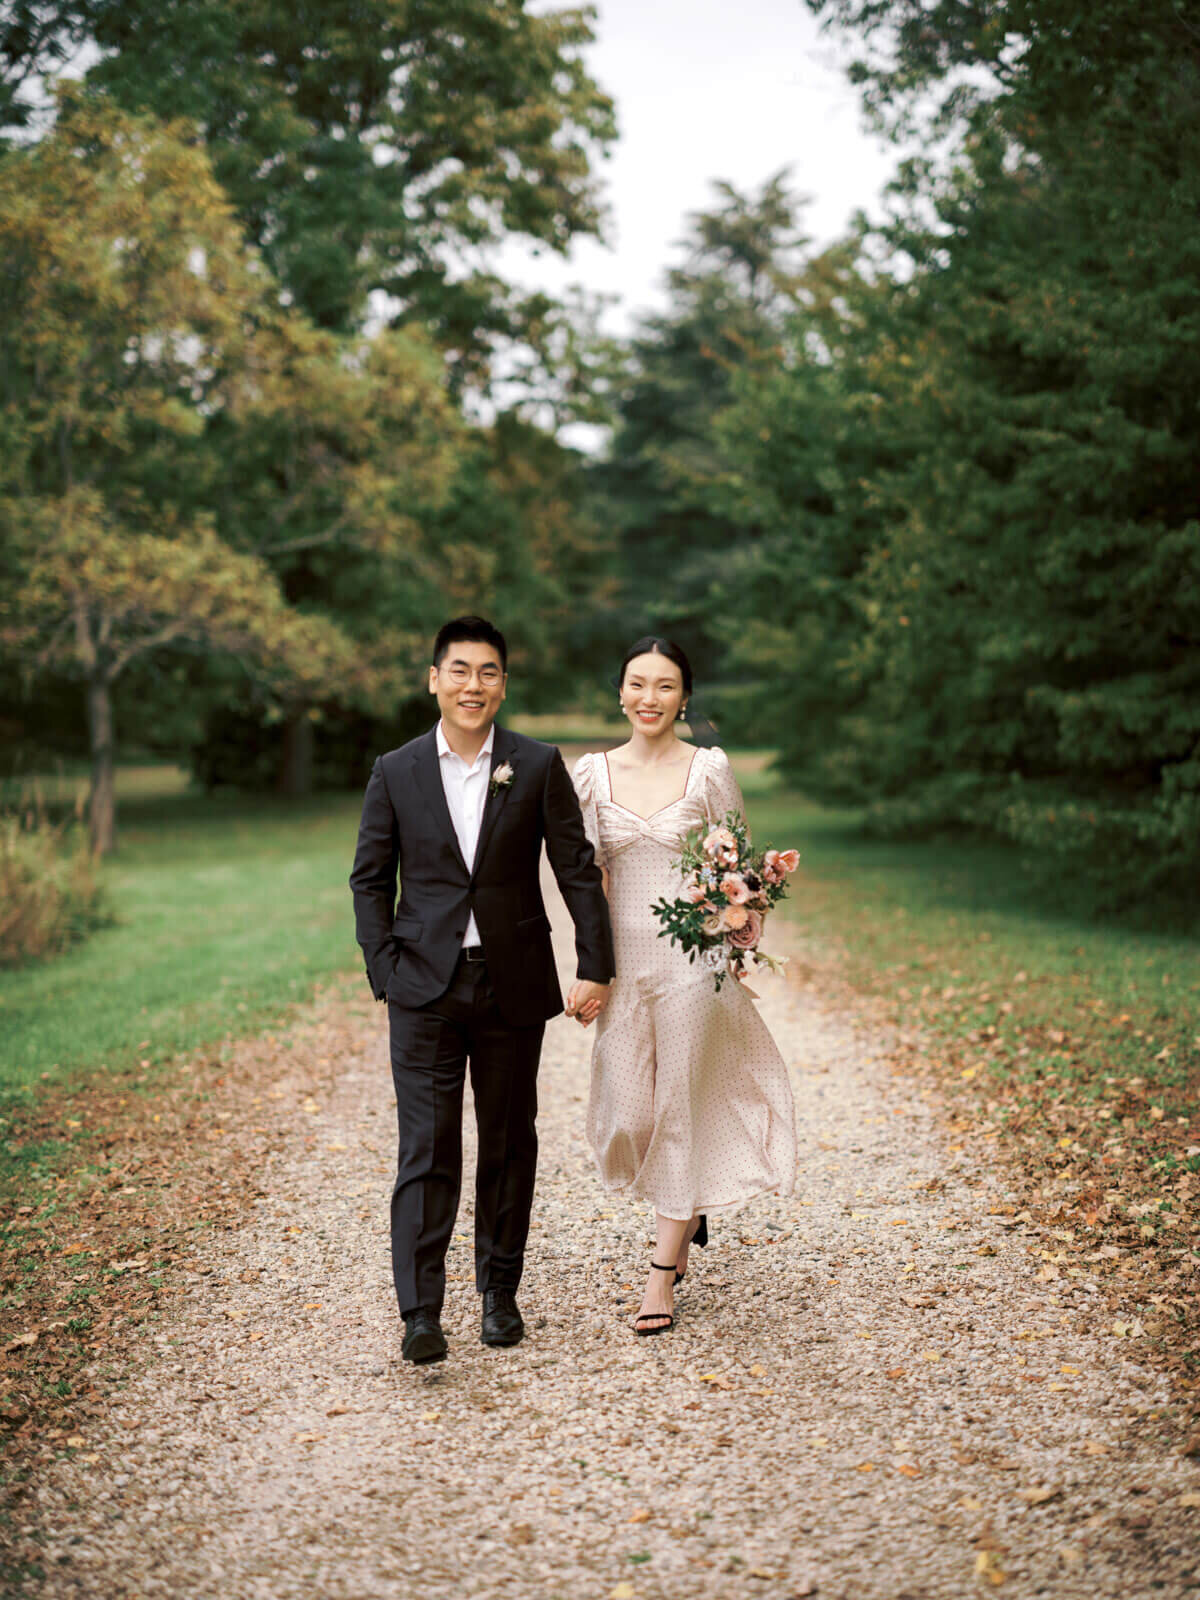 The engaged couple is walking on a trail filled with fall leaves, amidst the beautiful fall foliage. Image by Jenny Fu Studio